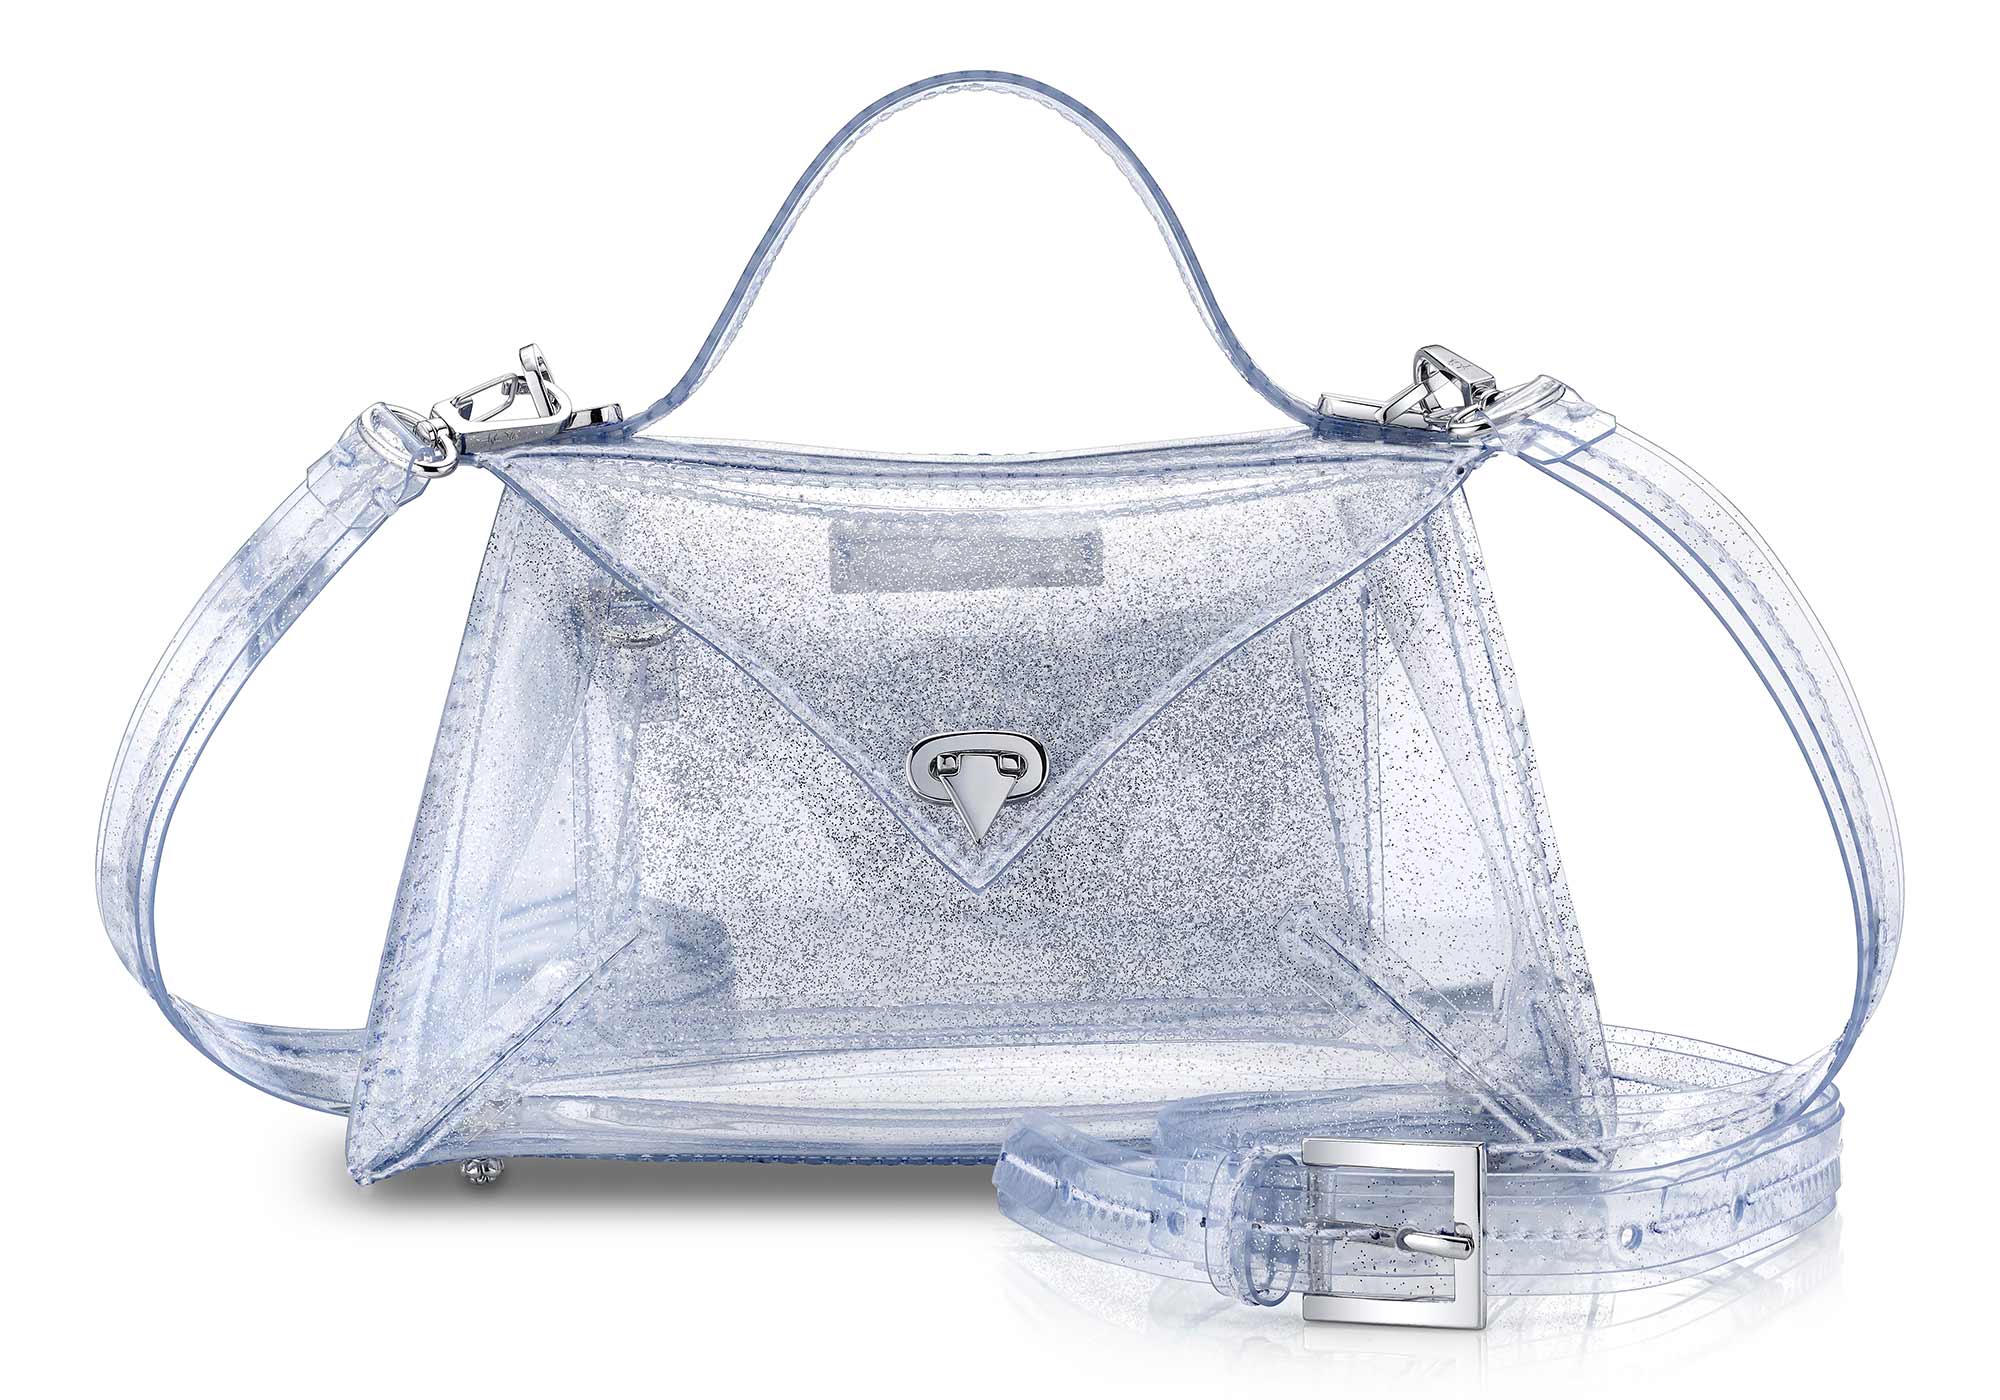 Women's Jelly Handbag in Various Different Colors.